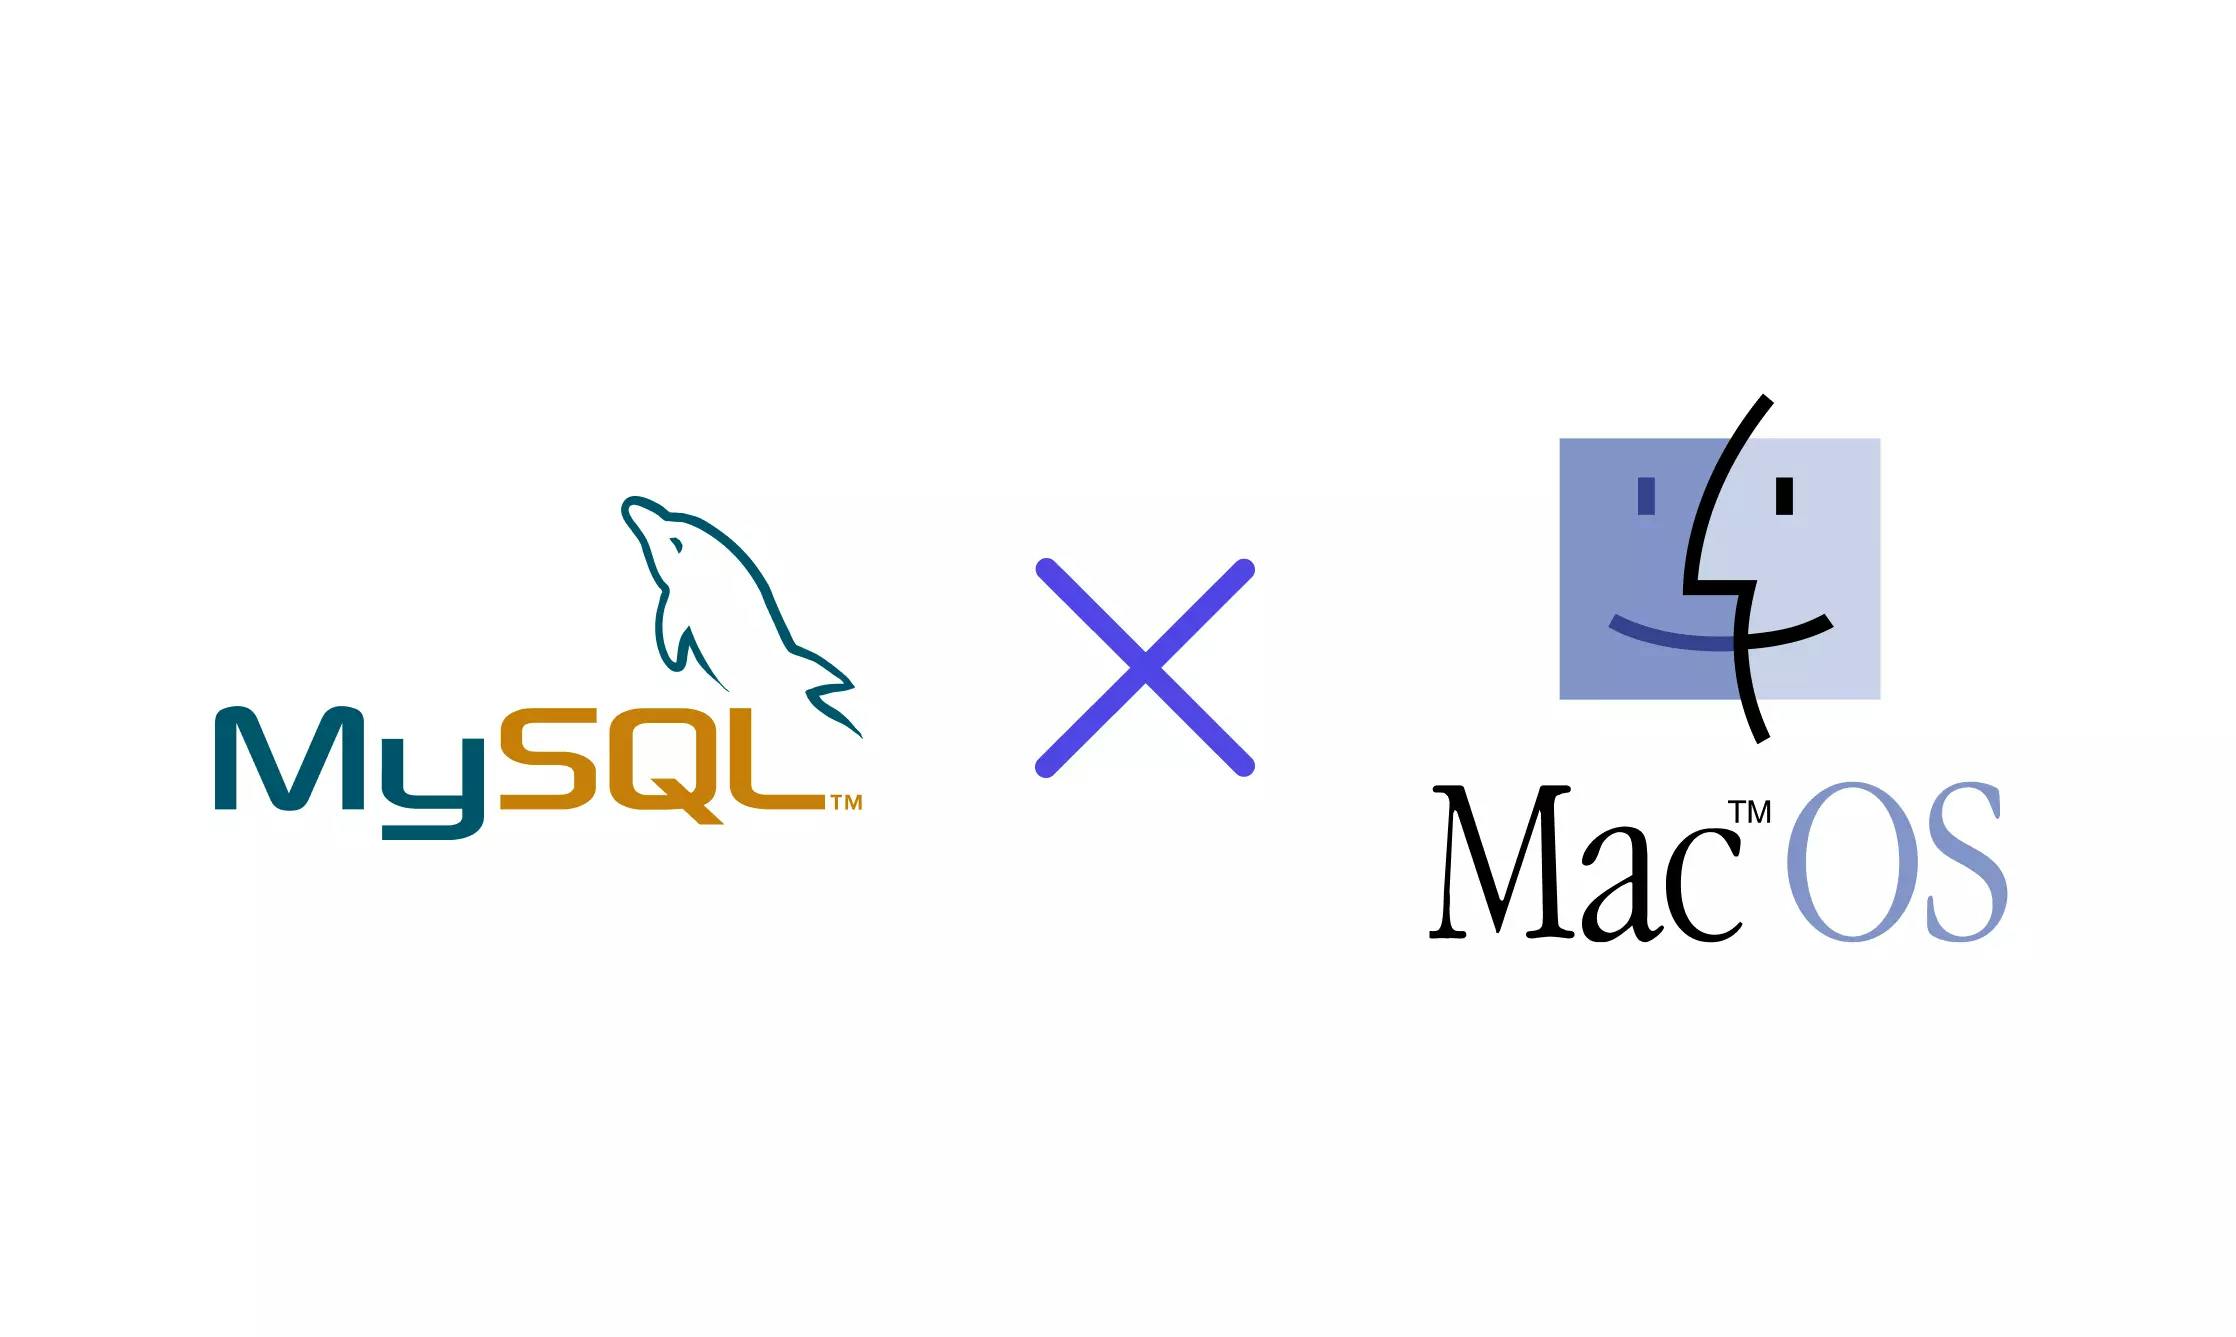 How to install MySQL Shell on Your Mac